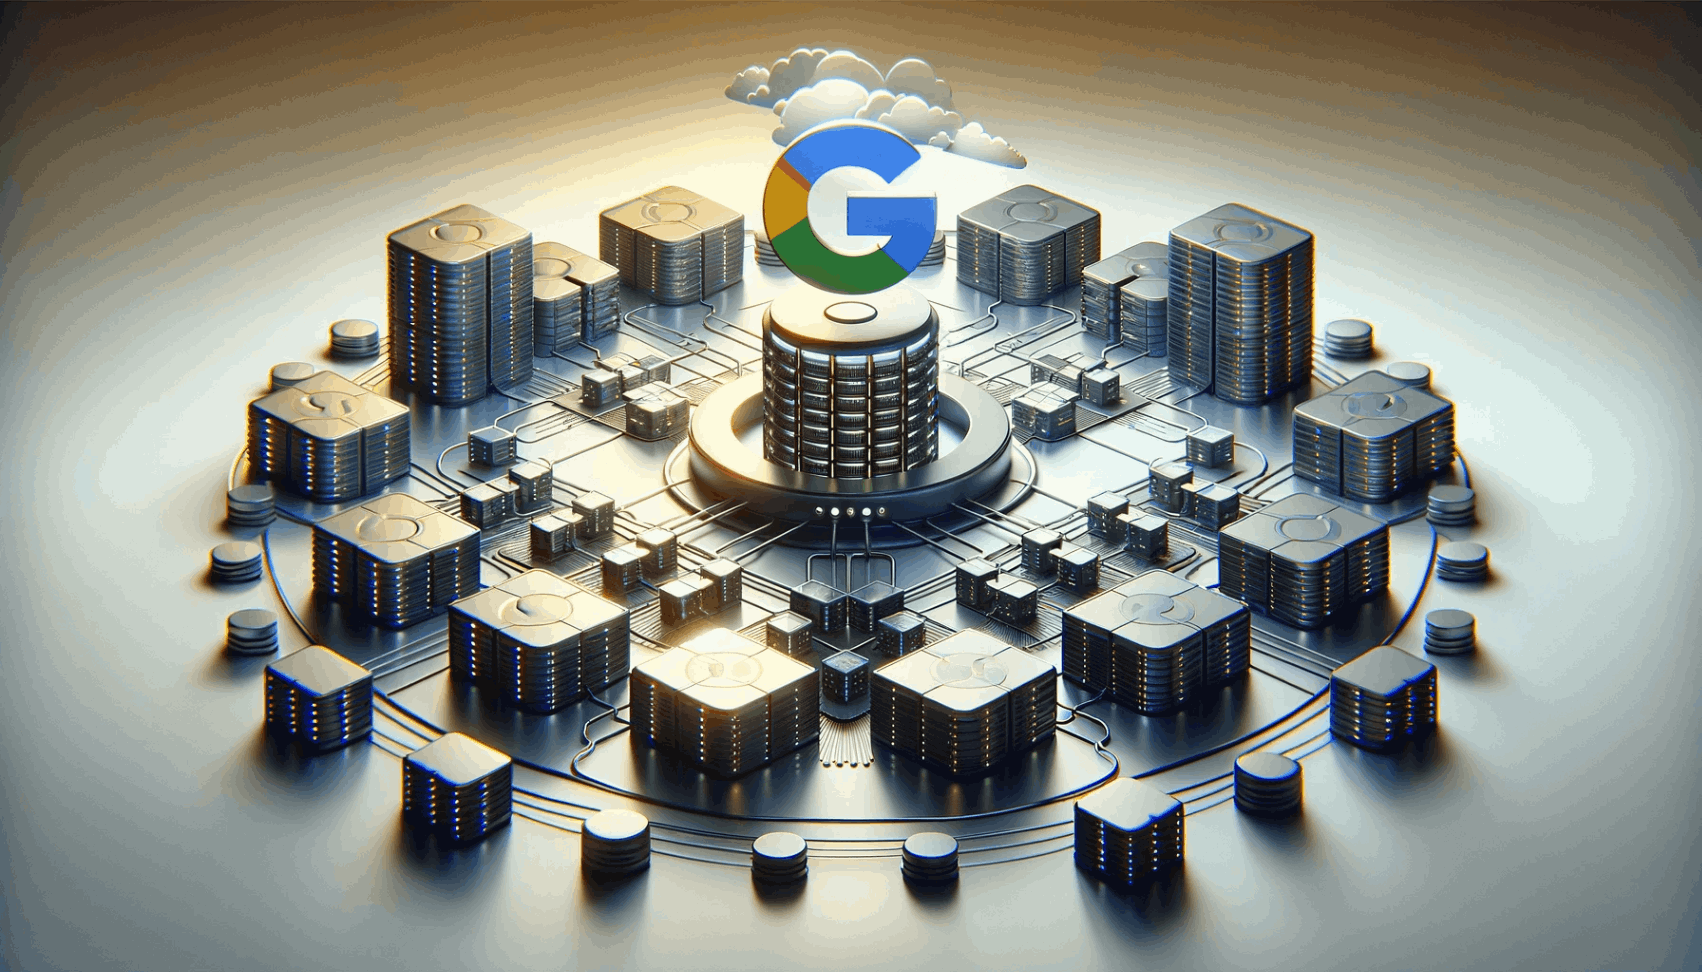 Google File System: Chunk and Conquer